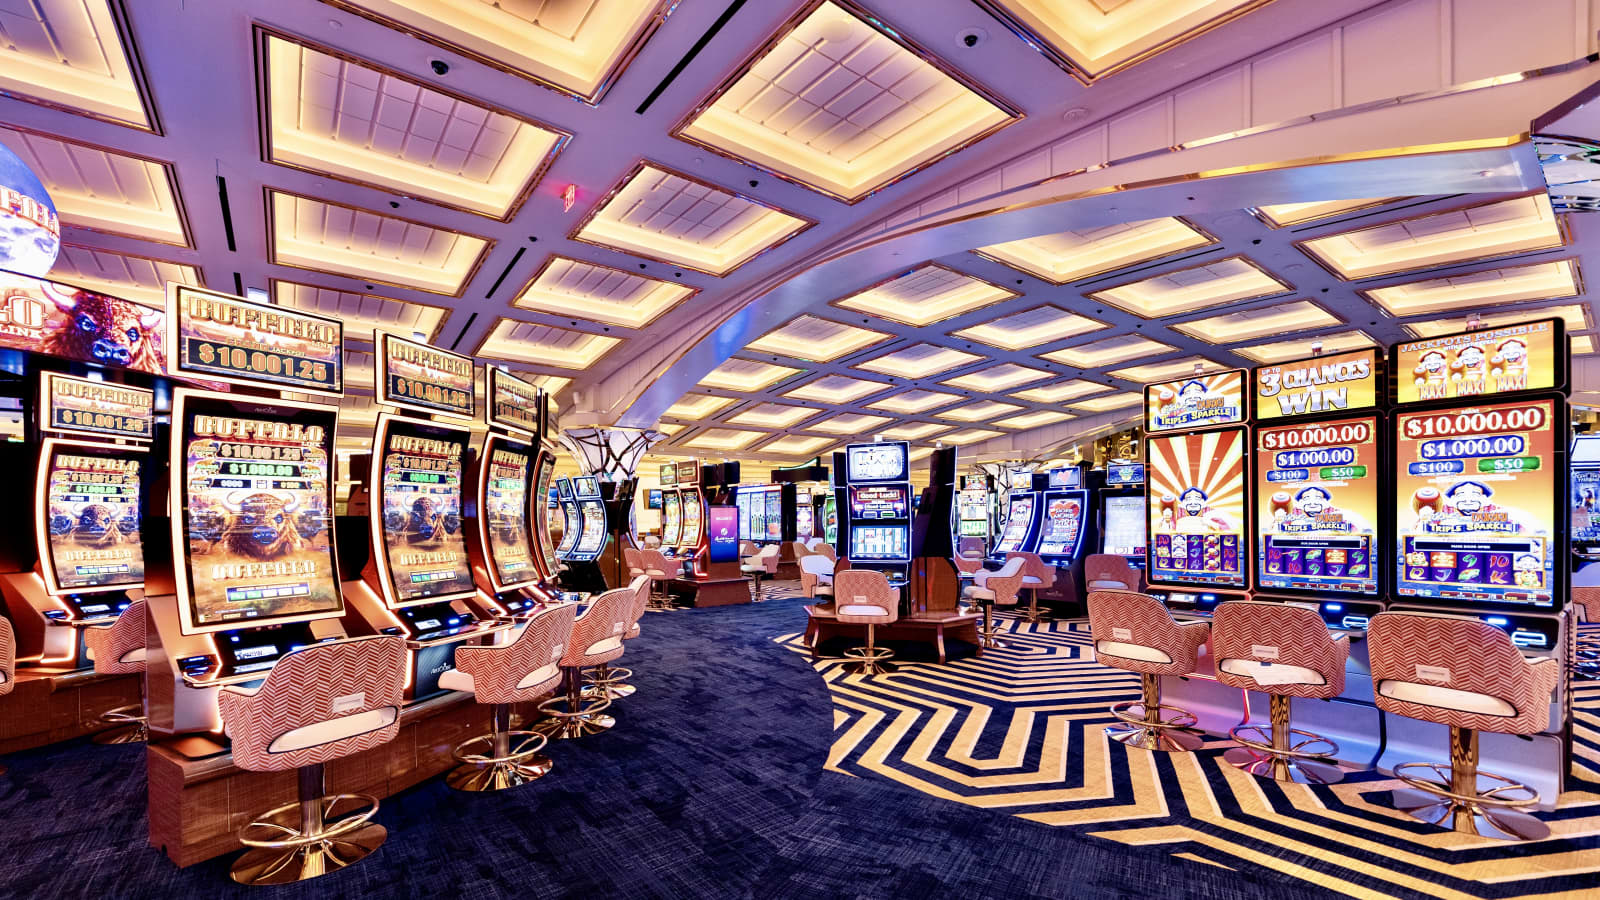 All Your Information That You May Enter To Play Slot Games Shall Always Remain Confidential